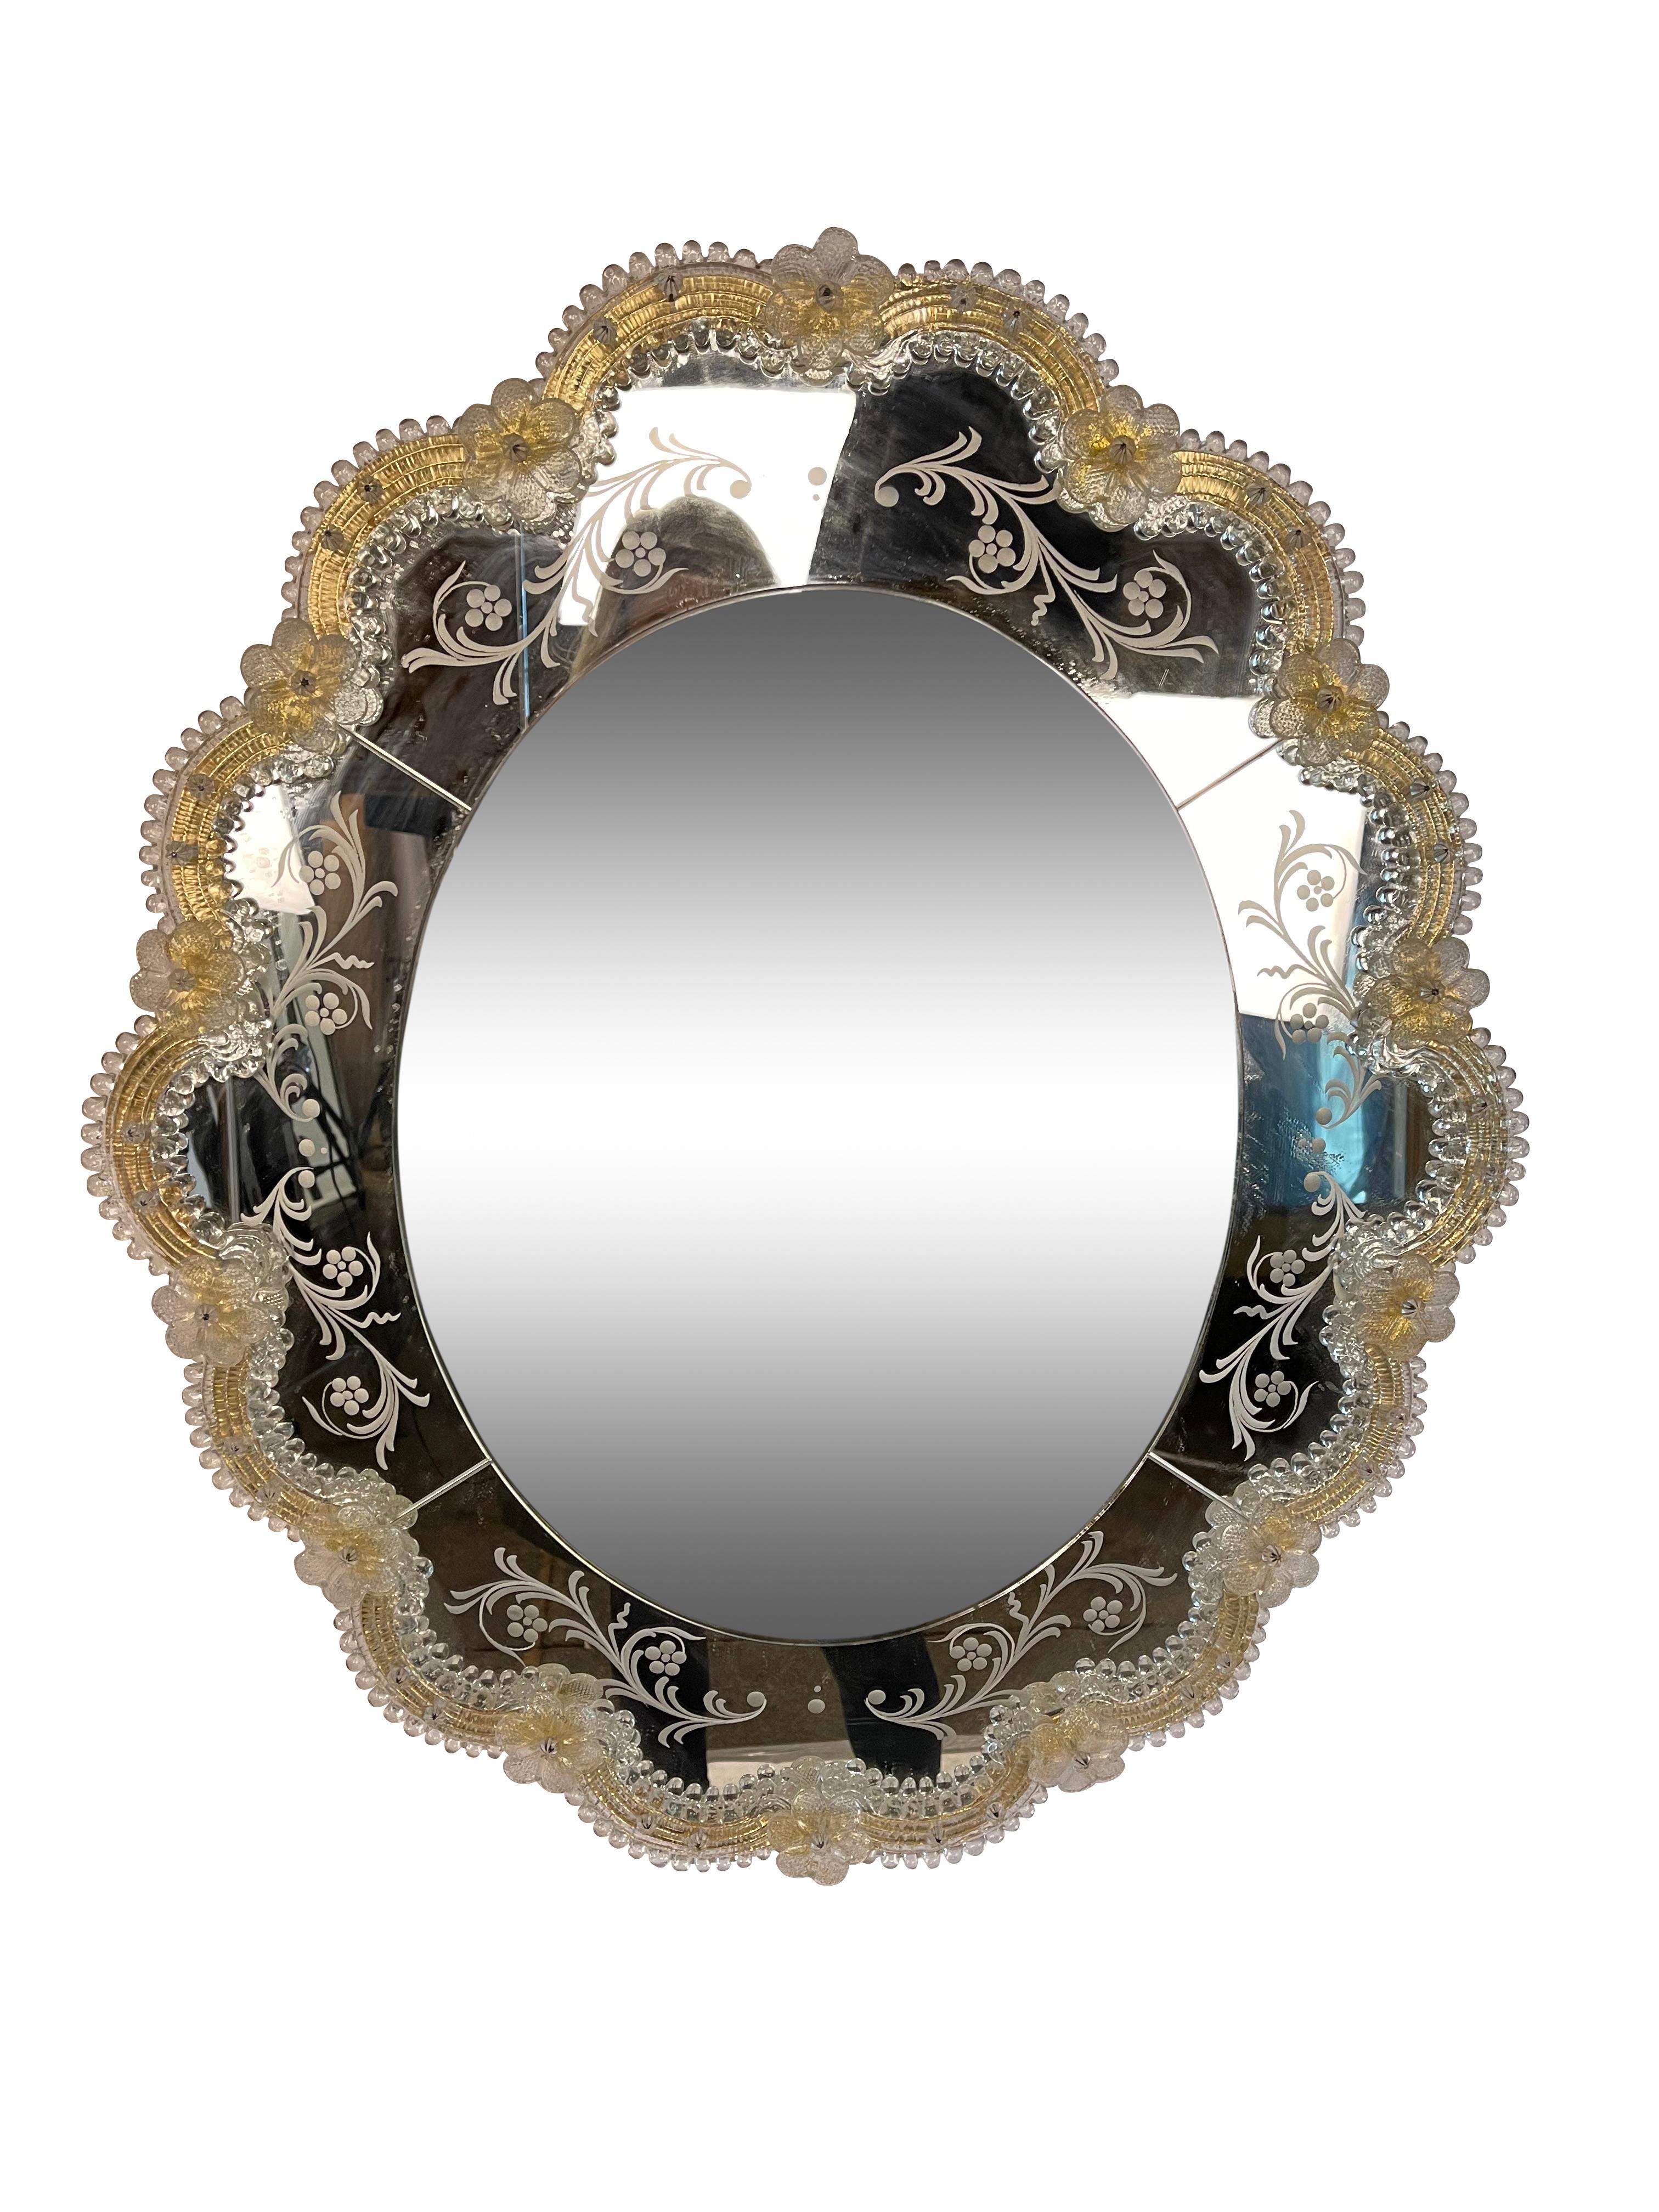 Italian Pair of Murano Glass Oval Mirrors with Gold Glass Accents